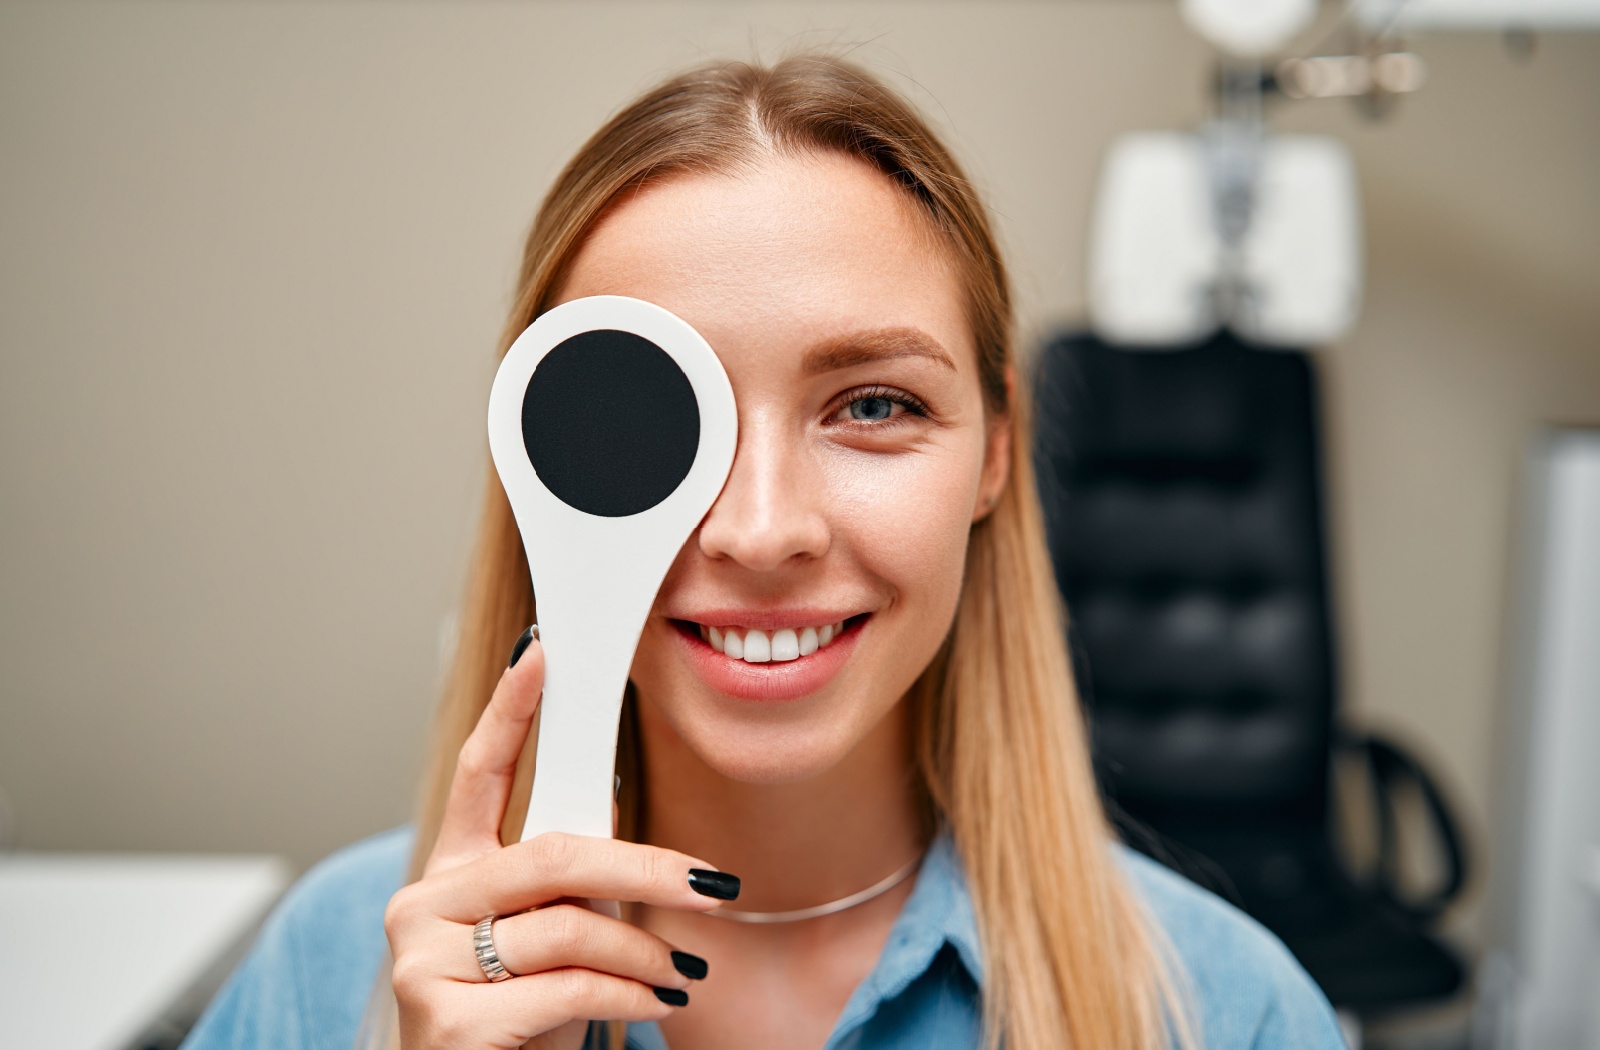 A patient in a blue shirt with nicely manicured fingernails smiles while holding a paddle that covers their right eye to test their vision while at the optometrist's office.